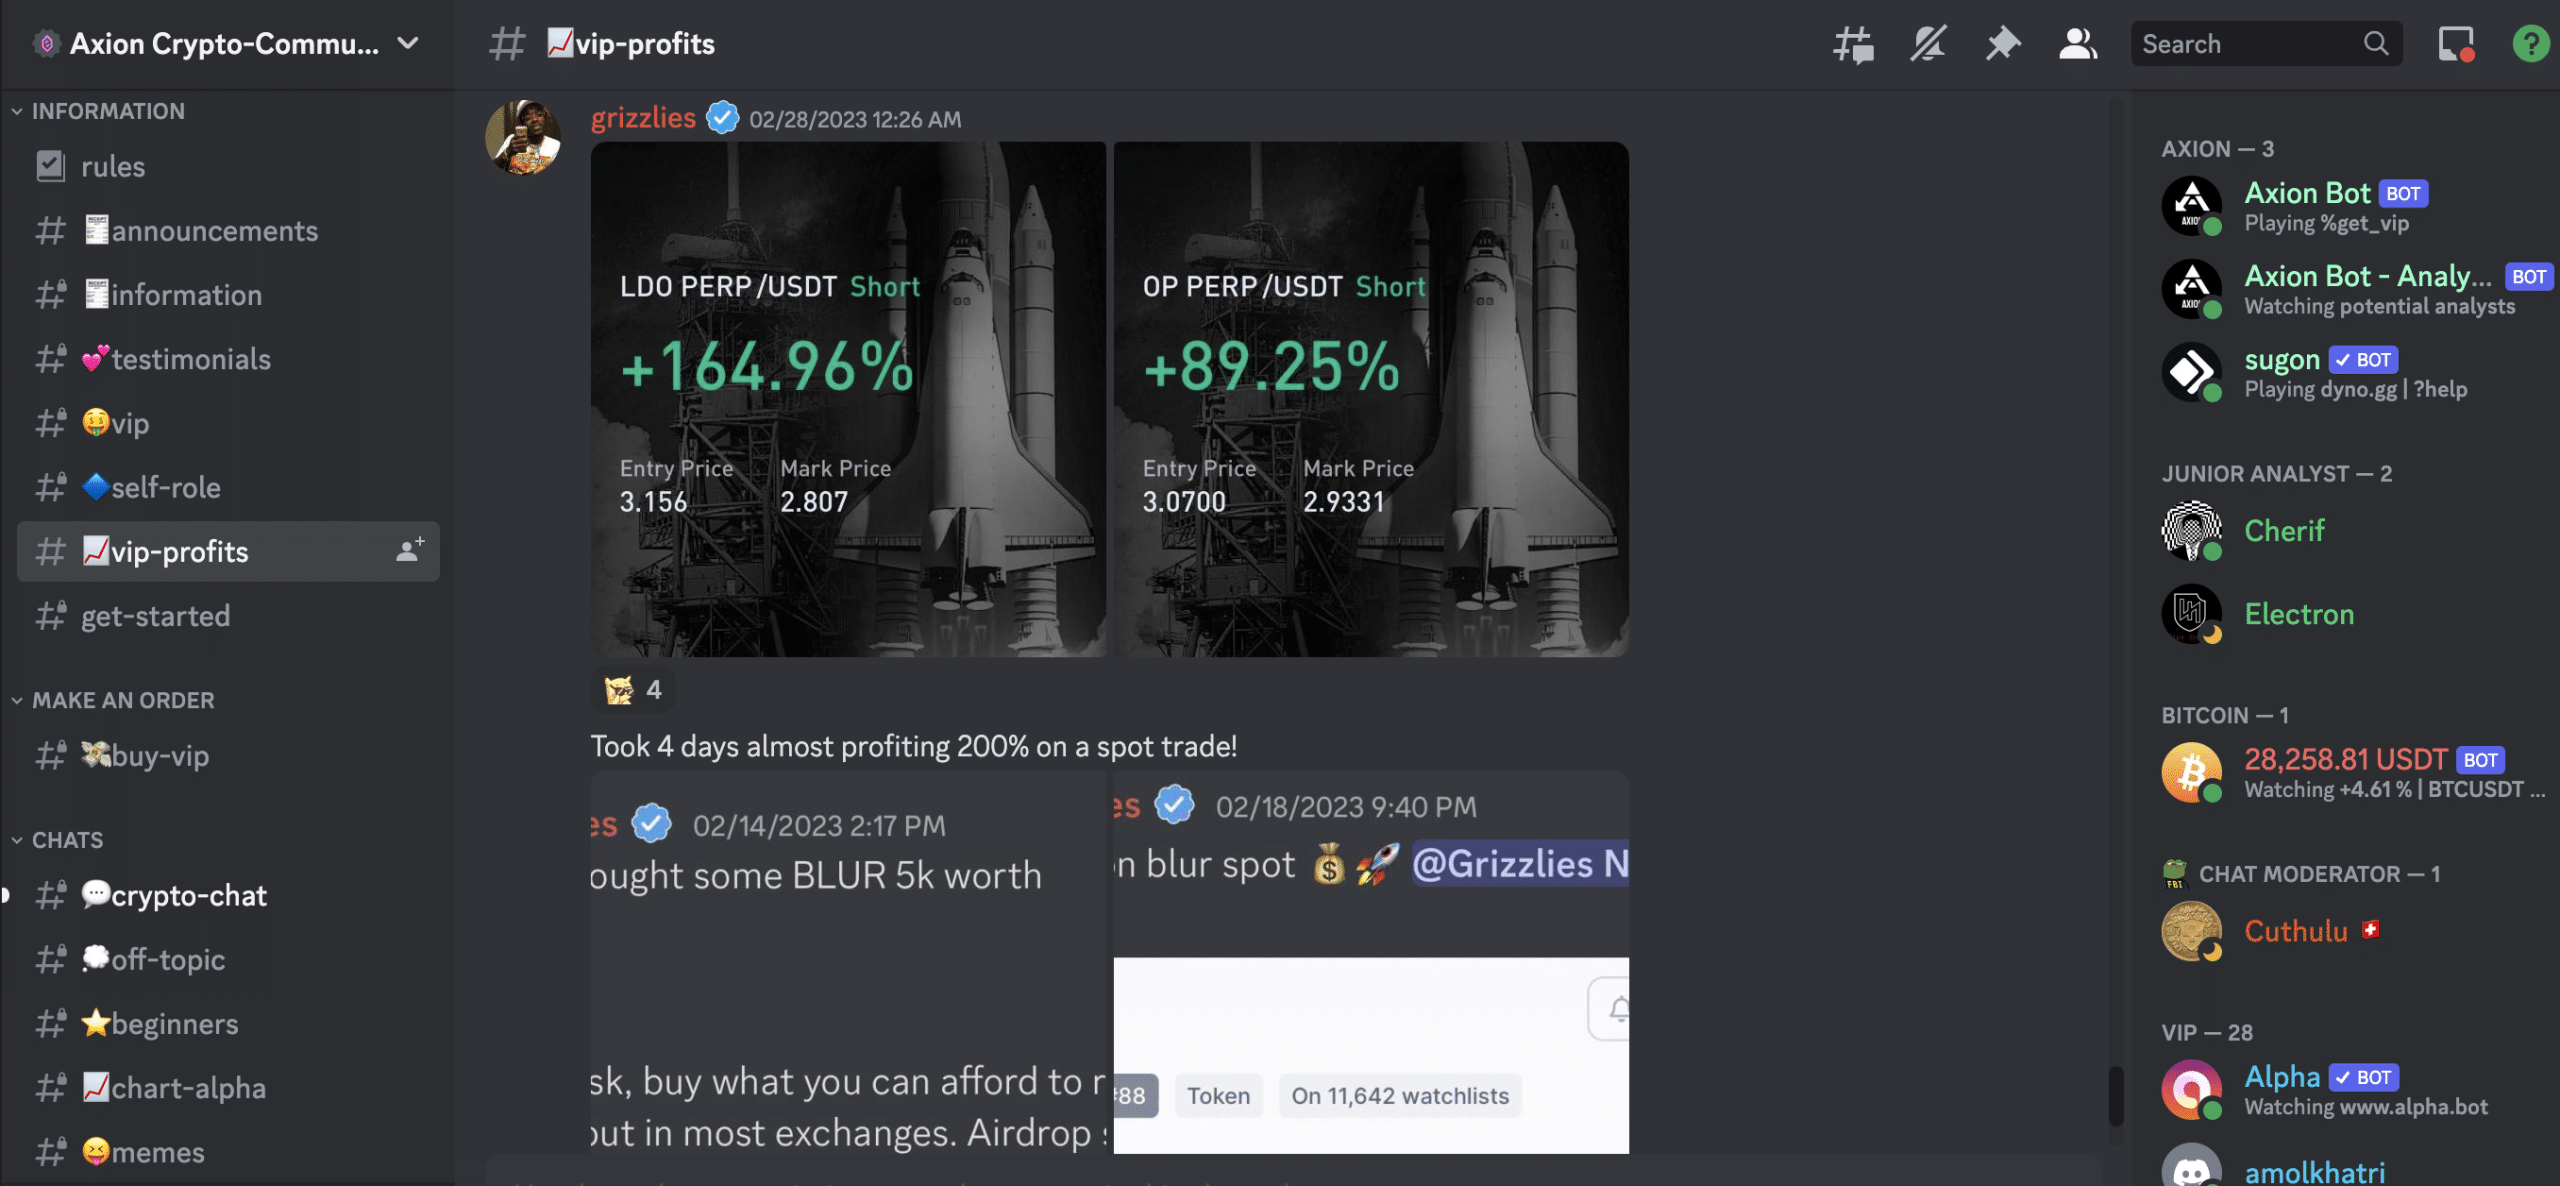 Bitcoin Investment Group Discord